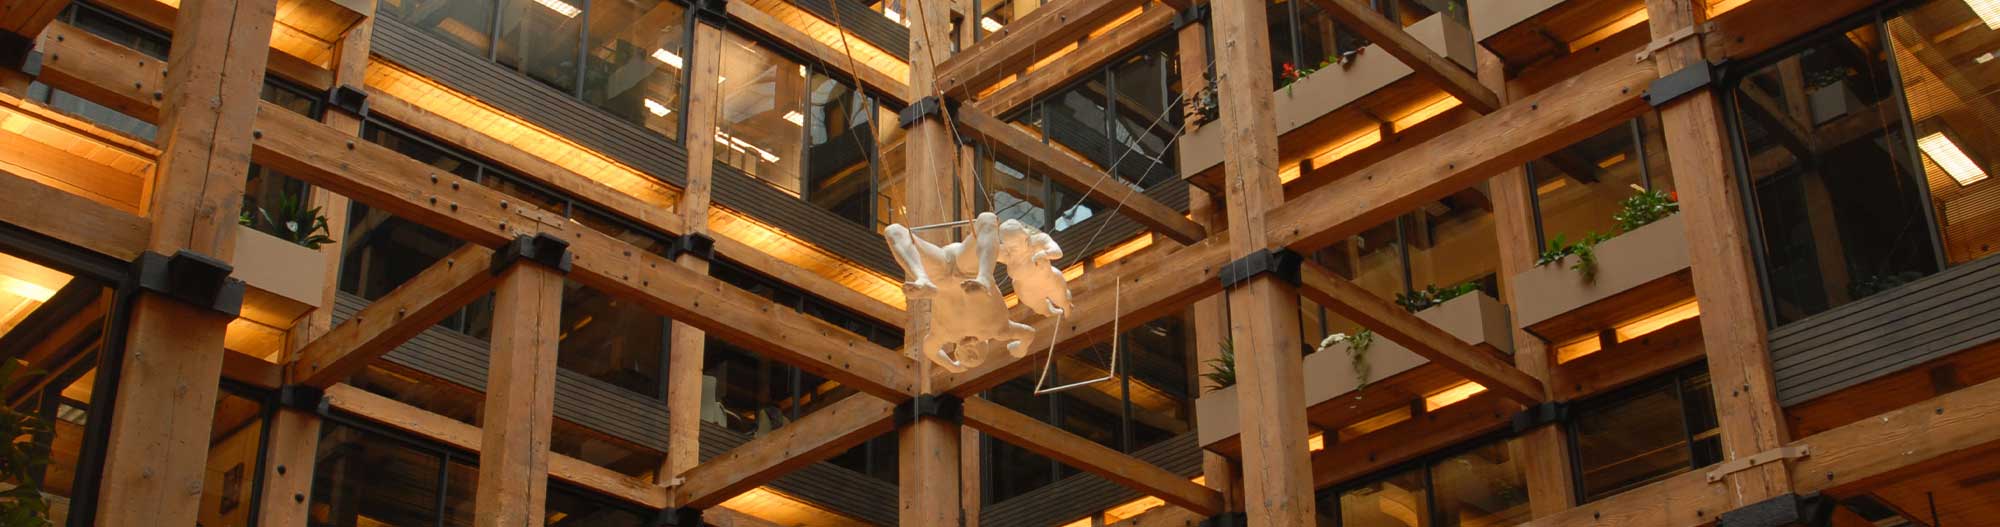 Image of the inside of a museum featuring wood construction